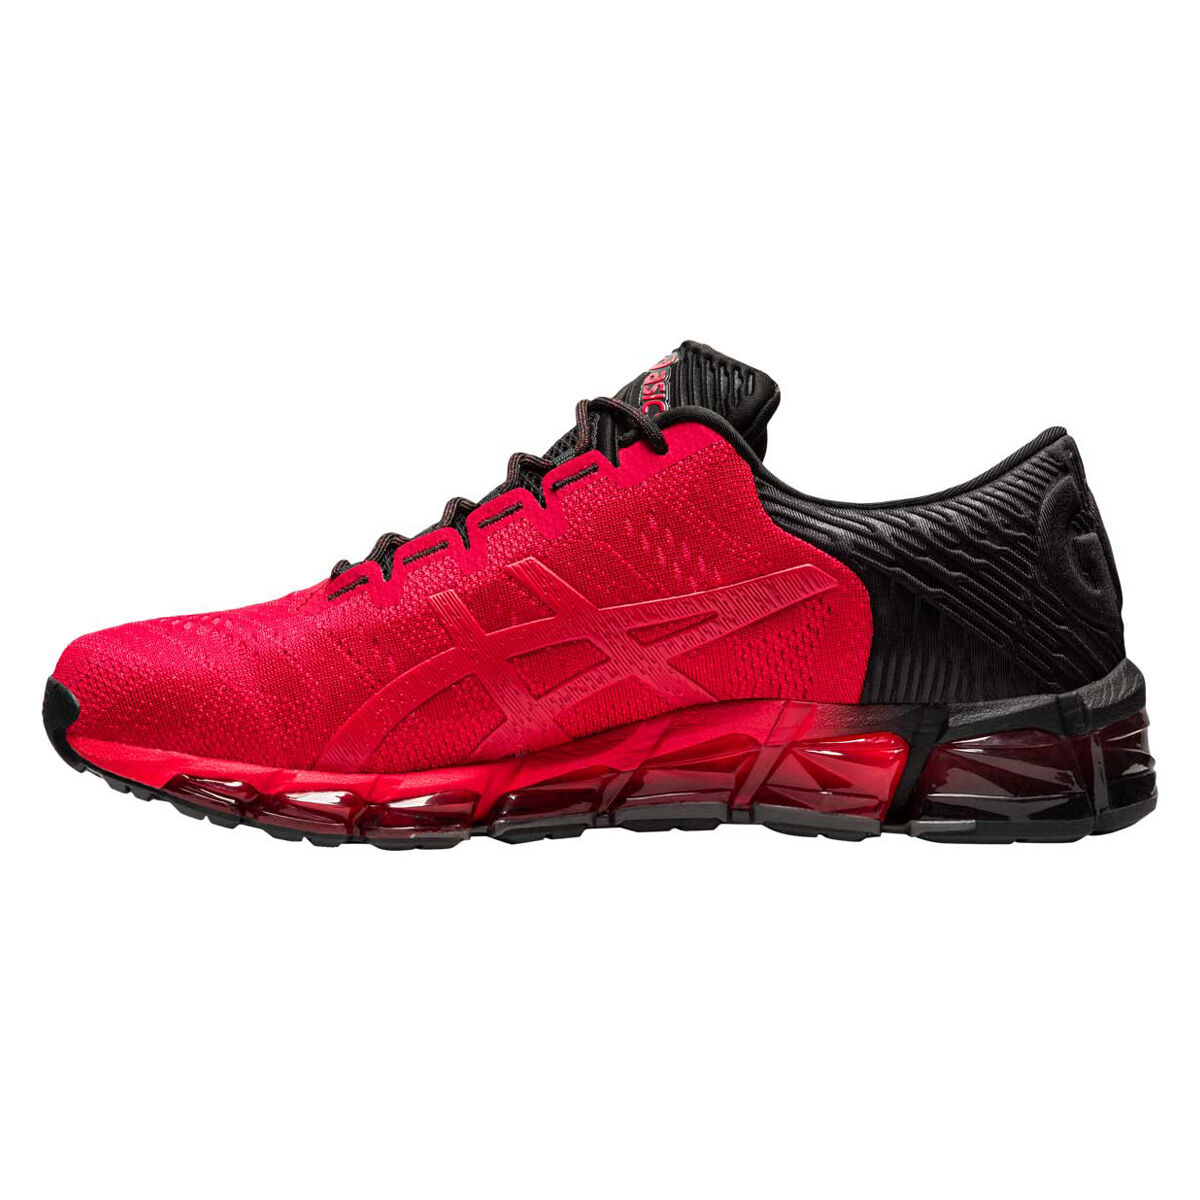 asics 360 red Cheaper Than Retail Price 